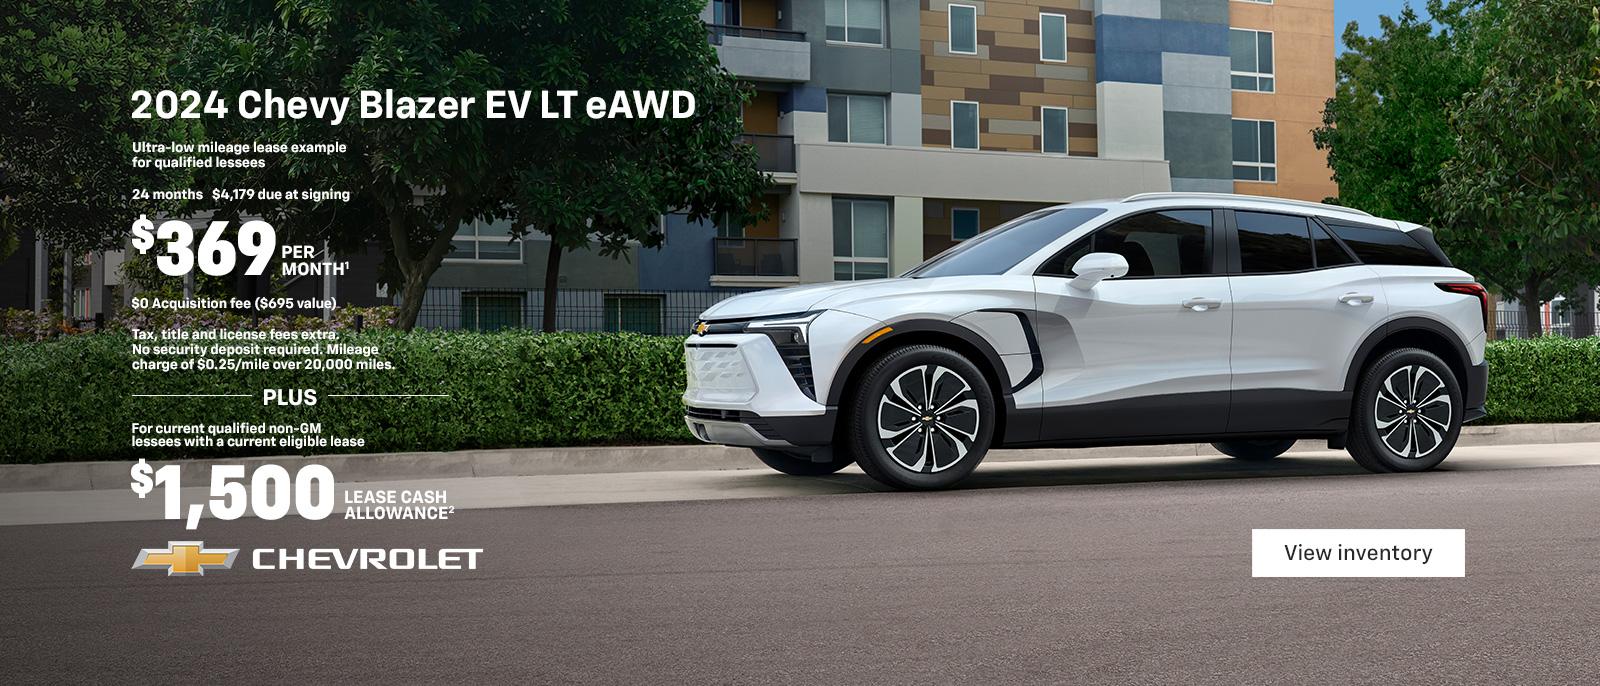 2024 Chevy Blazer EV LT. 2024 MotorTend SUV of the Year. The first-ever, all-electric Blazer EV. Ultra-low mileage lease example for qualified lessees. $369 per month. 24 months. $4,179 due at signing. $0 Acquisition fee ($695 value). Plus, for current qualified non-GM lessees with a current eligible lease
$1,500 lease cash allowance.